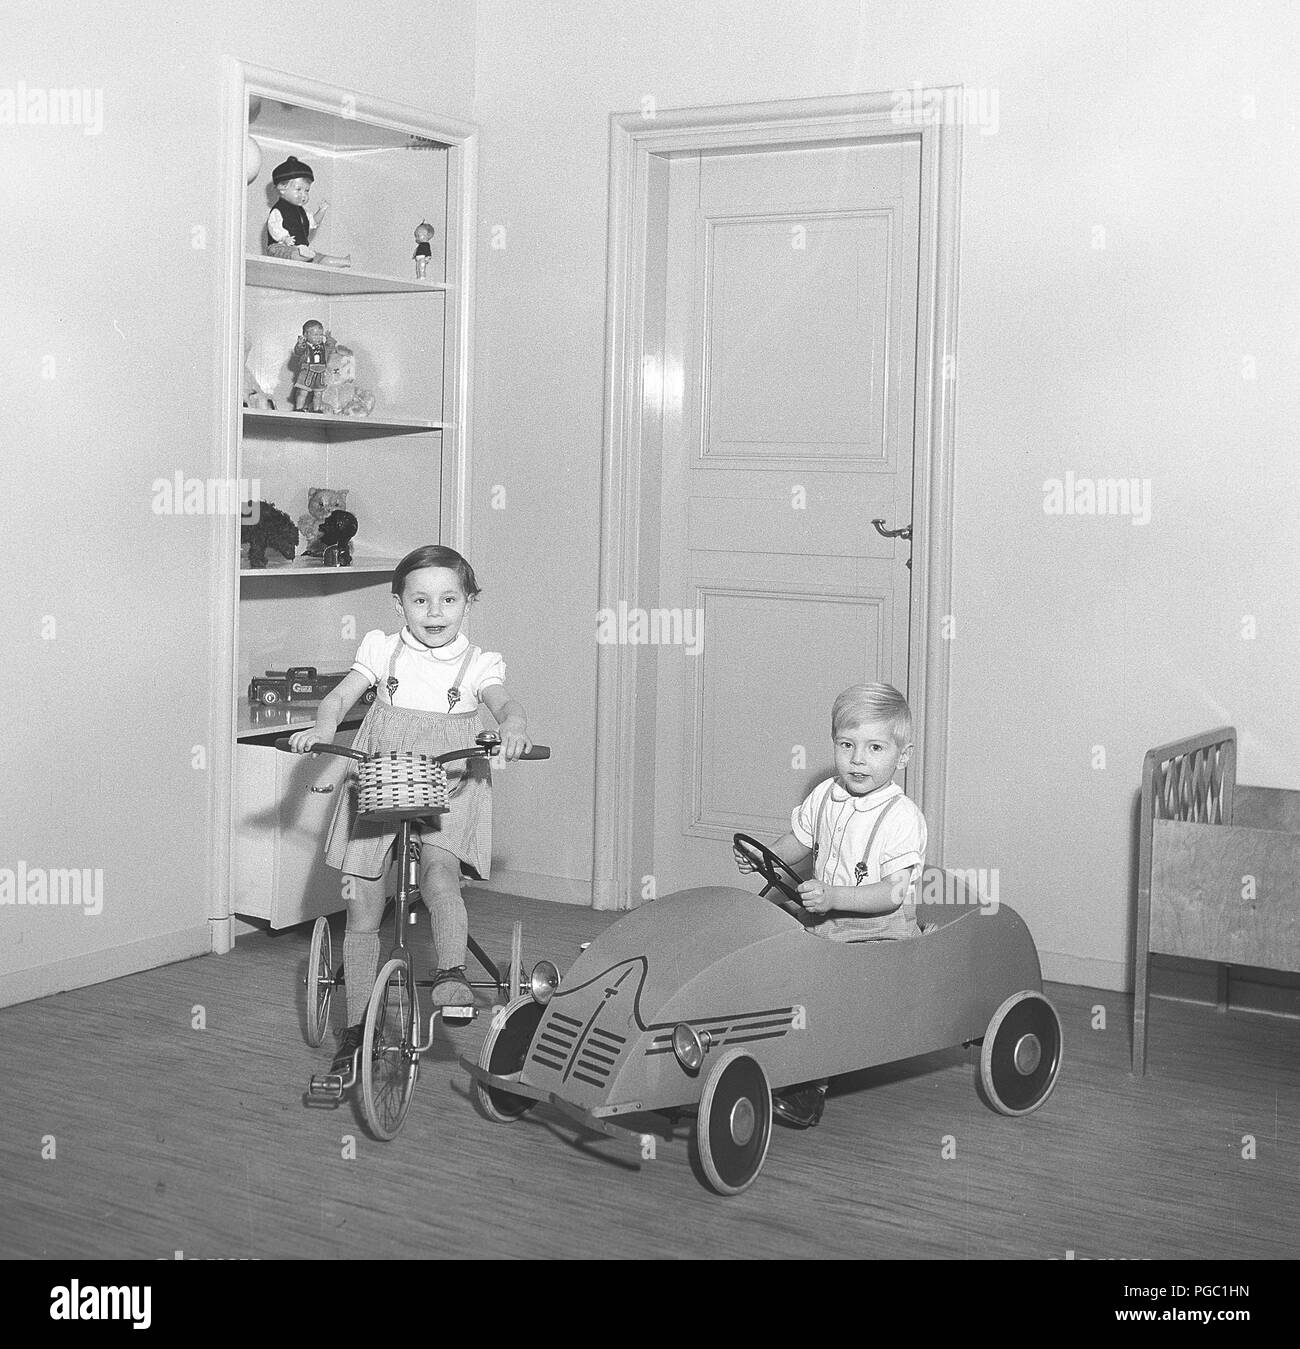 1950s children. Two children with their toys. The girls on her tricycle and the boy in his pedal car. Their toys are standing on the shelves behind.  Photo Kristoffersson ref CV23-3 Stock Photo